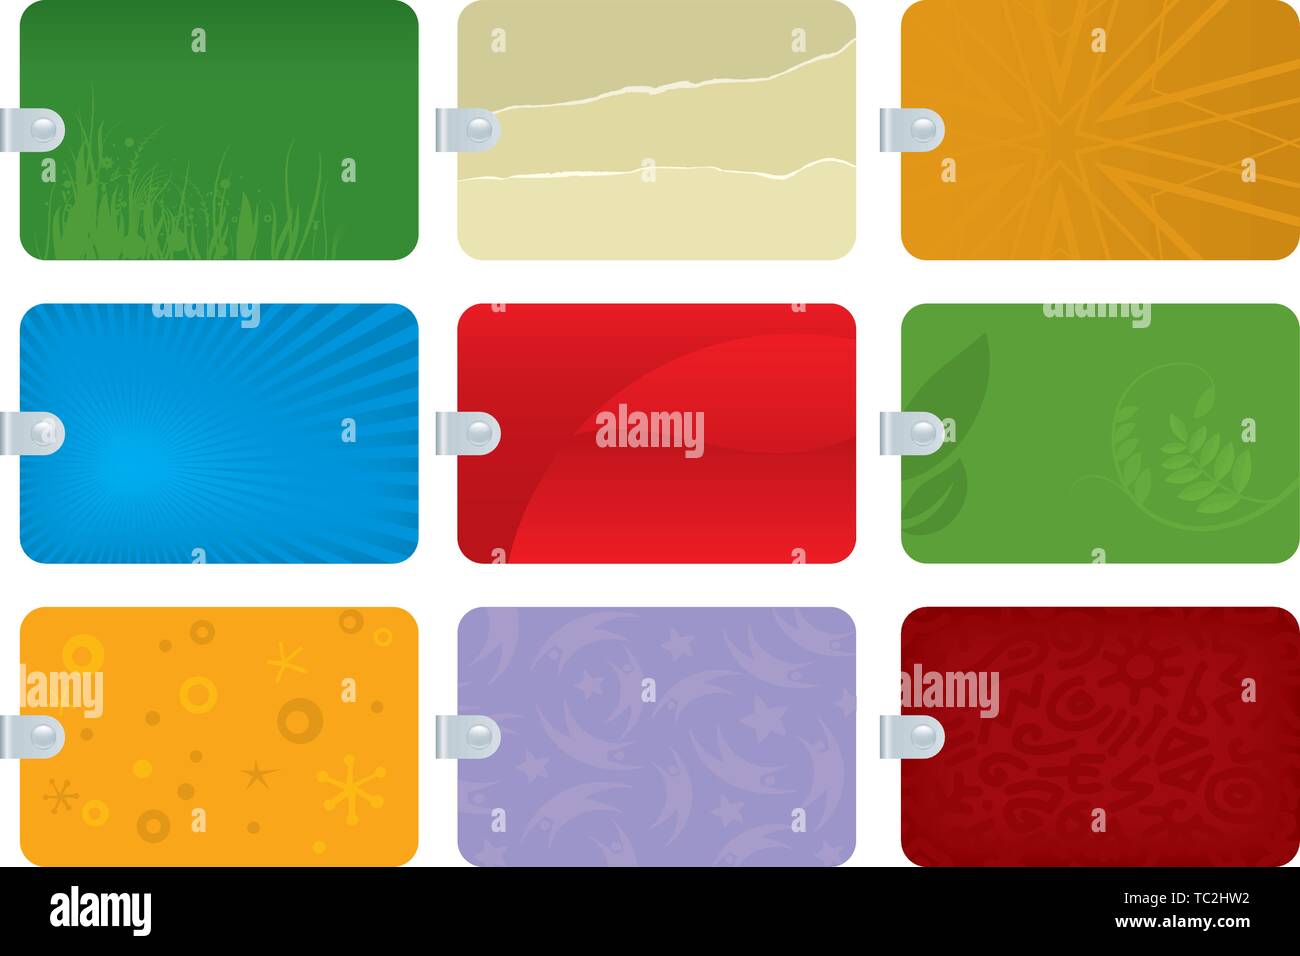 Vector illustration. Nine textured tags in different colors. Isolated. Stock Vector